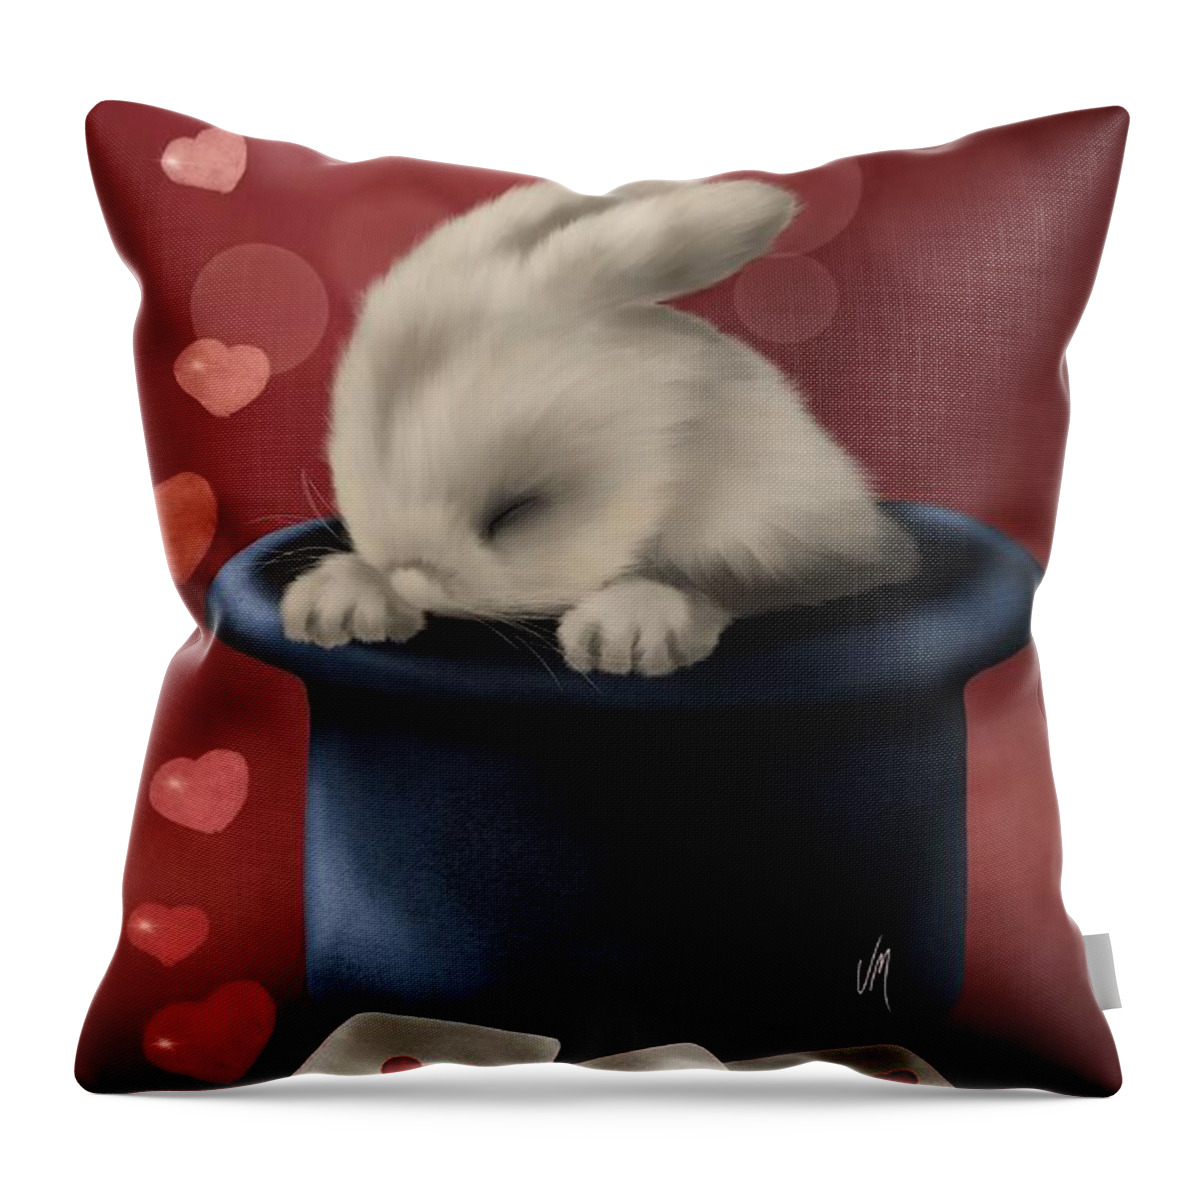 Magical Bunny Throw Pillow featuring the painting Magical bunny by Veronica Minozzi